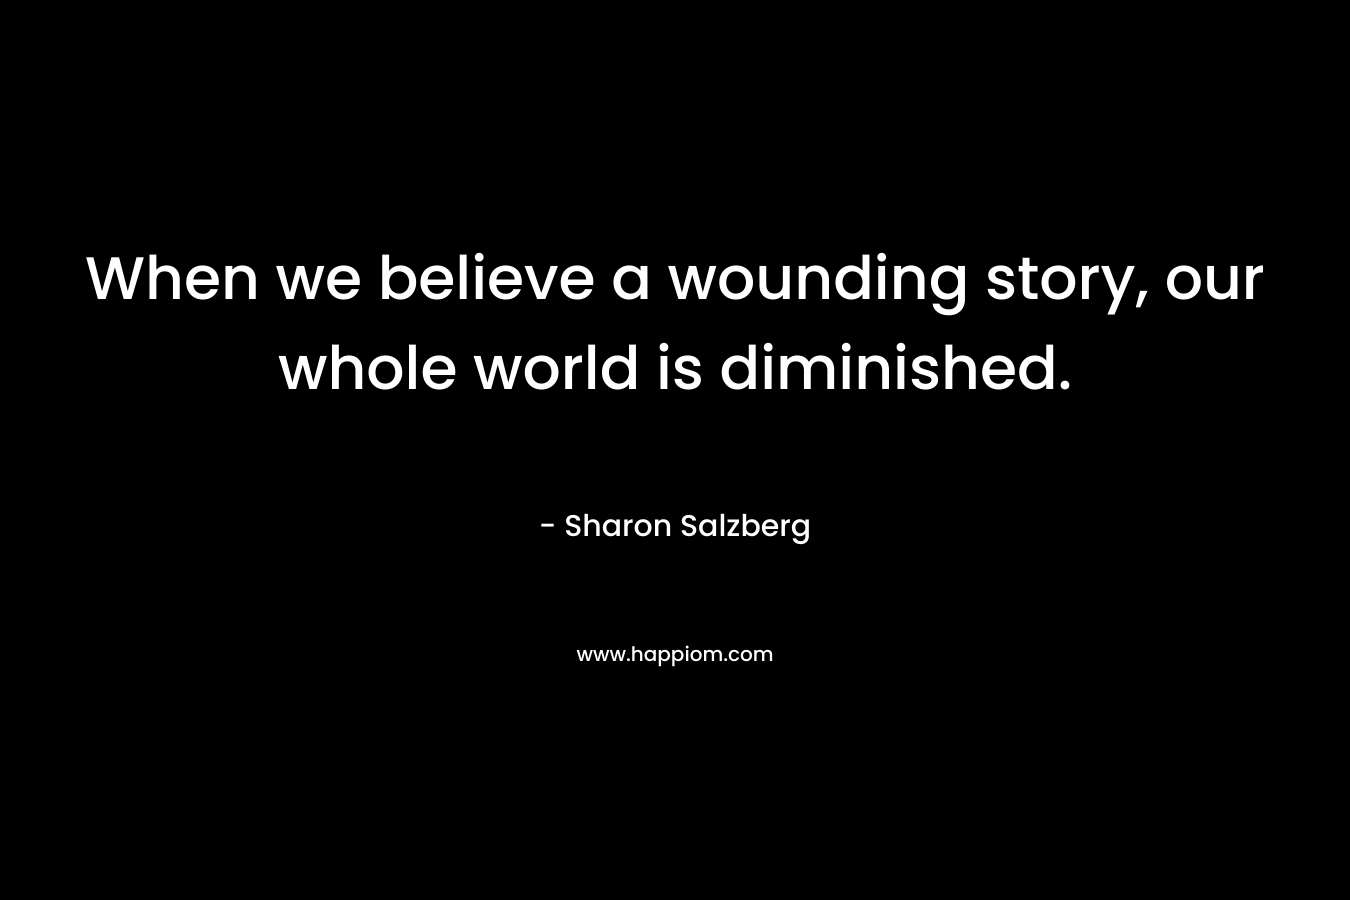 When we believe a wounding story, our whole world is diminished.